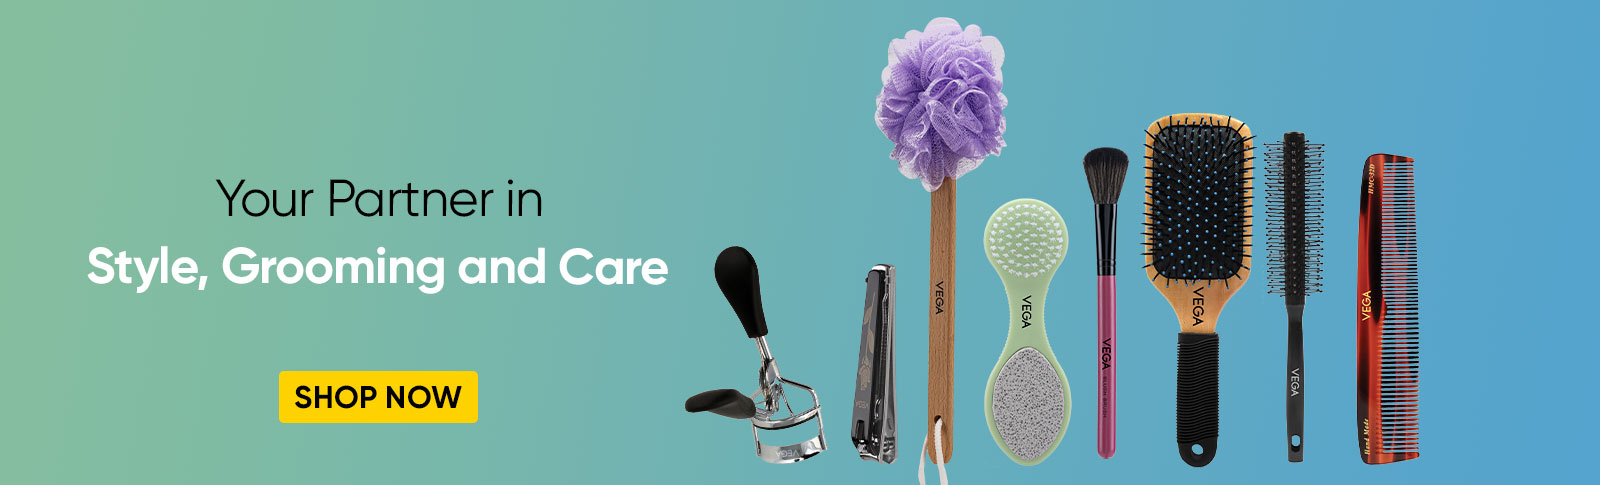 Your Partner in Style, Grooming and Care